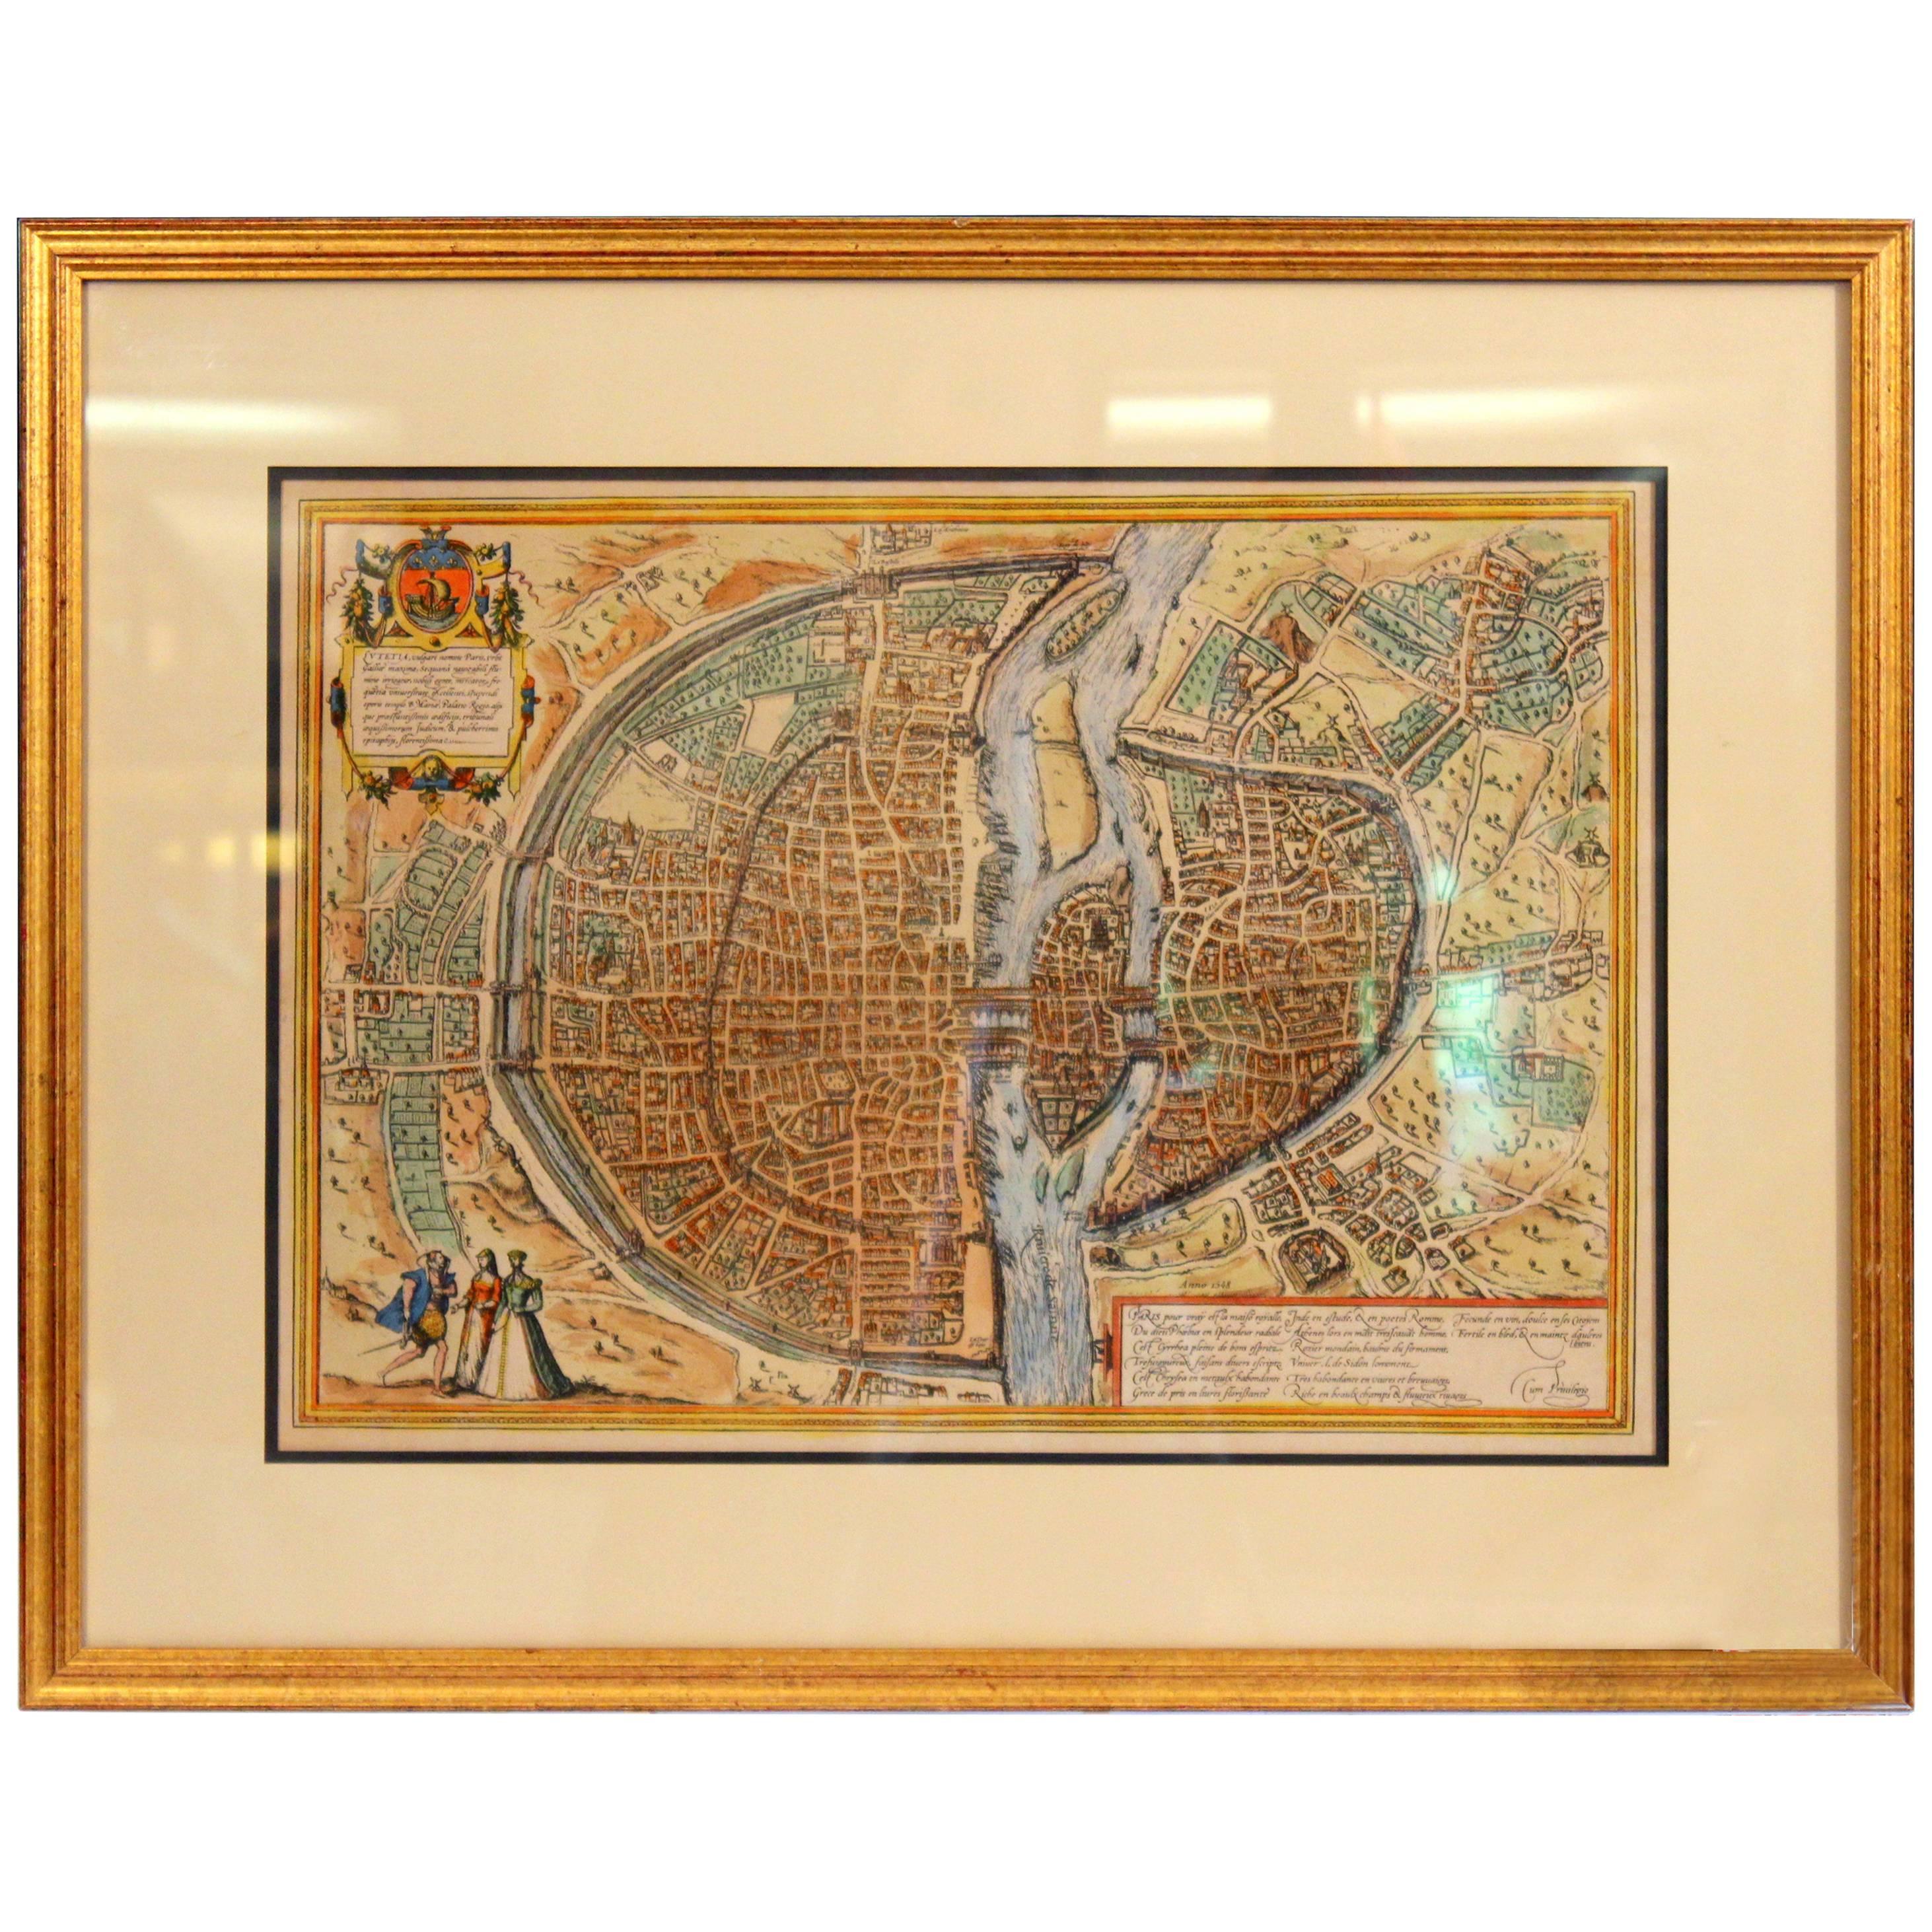 Old Engraving Map of Paris French Munster 16th Century Walled City Framed For Sale